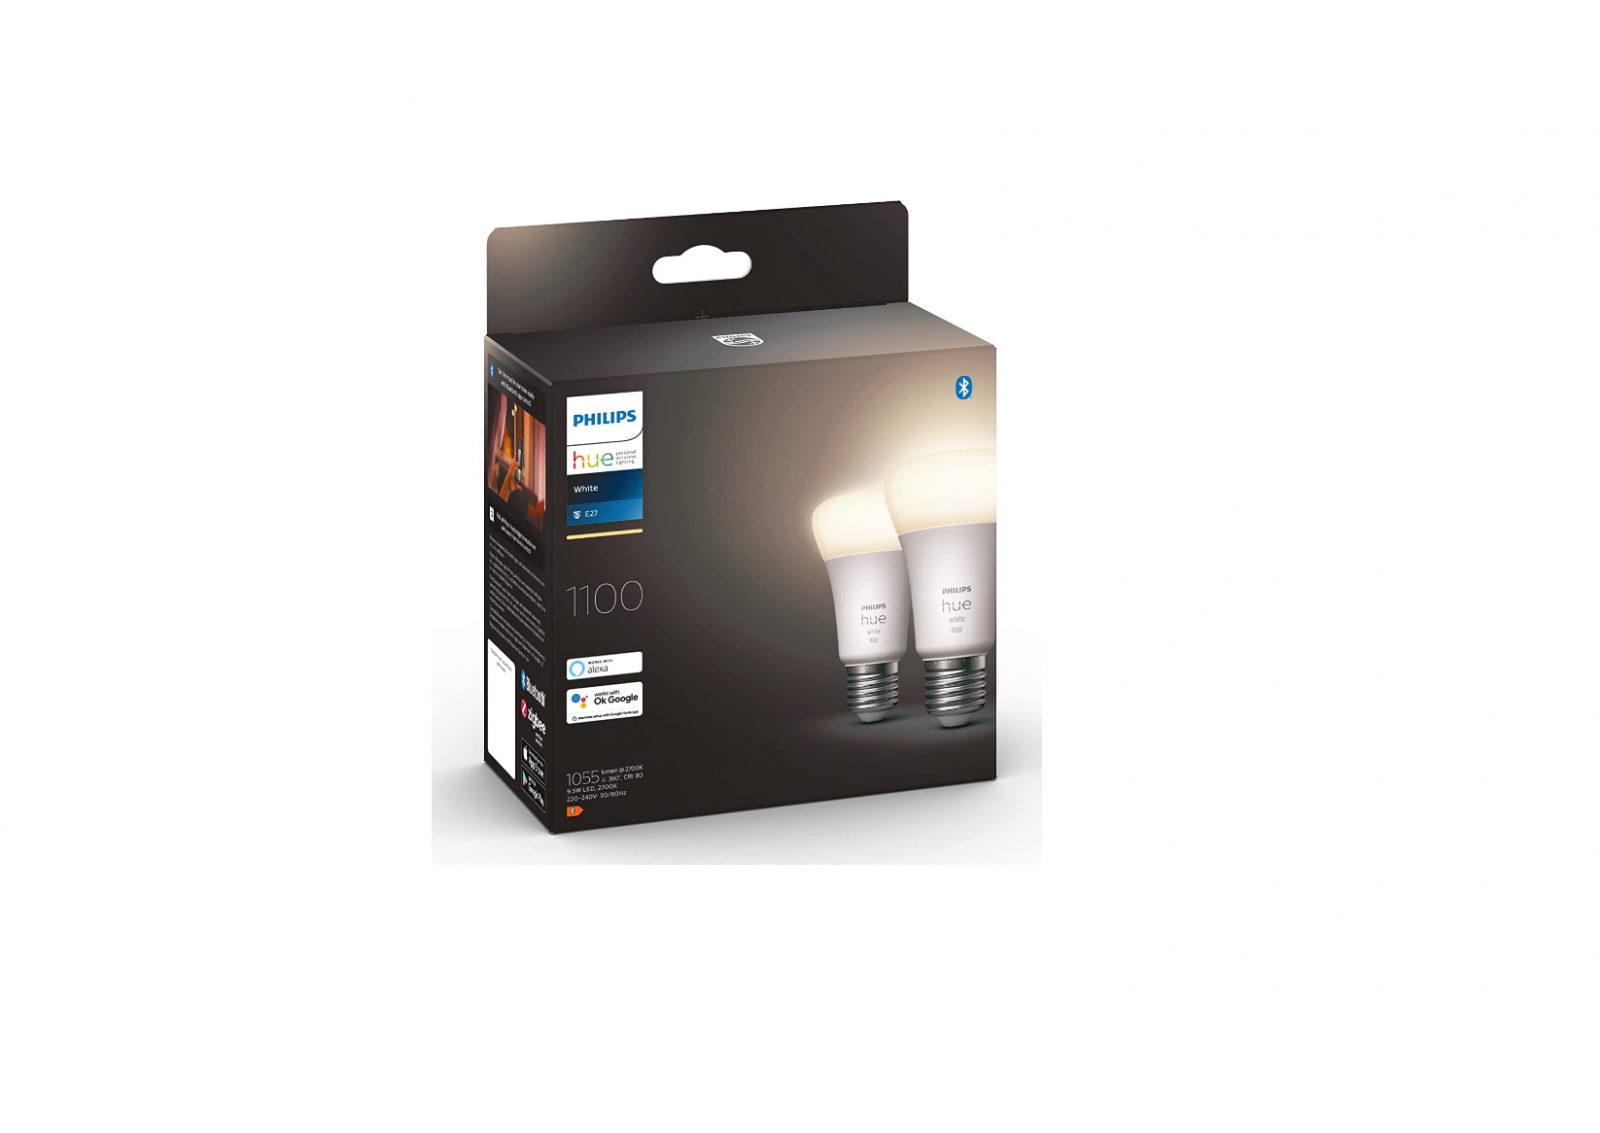 unknown in the meantime God Pachet 2 Becuri inteligente Philips Hue alb 75W Cu Bluetooth